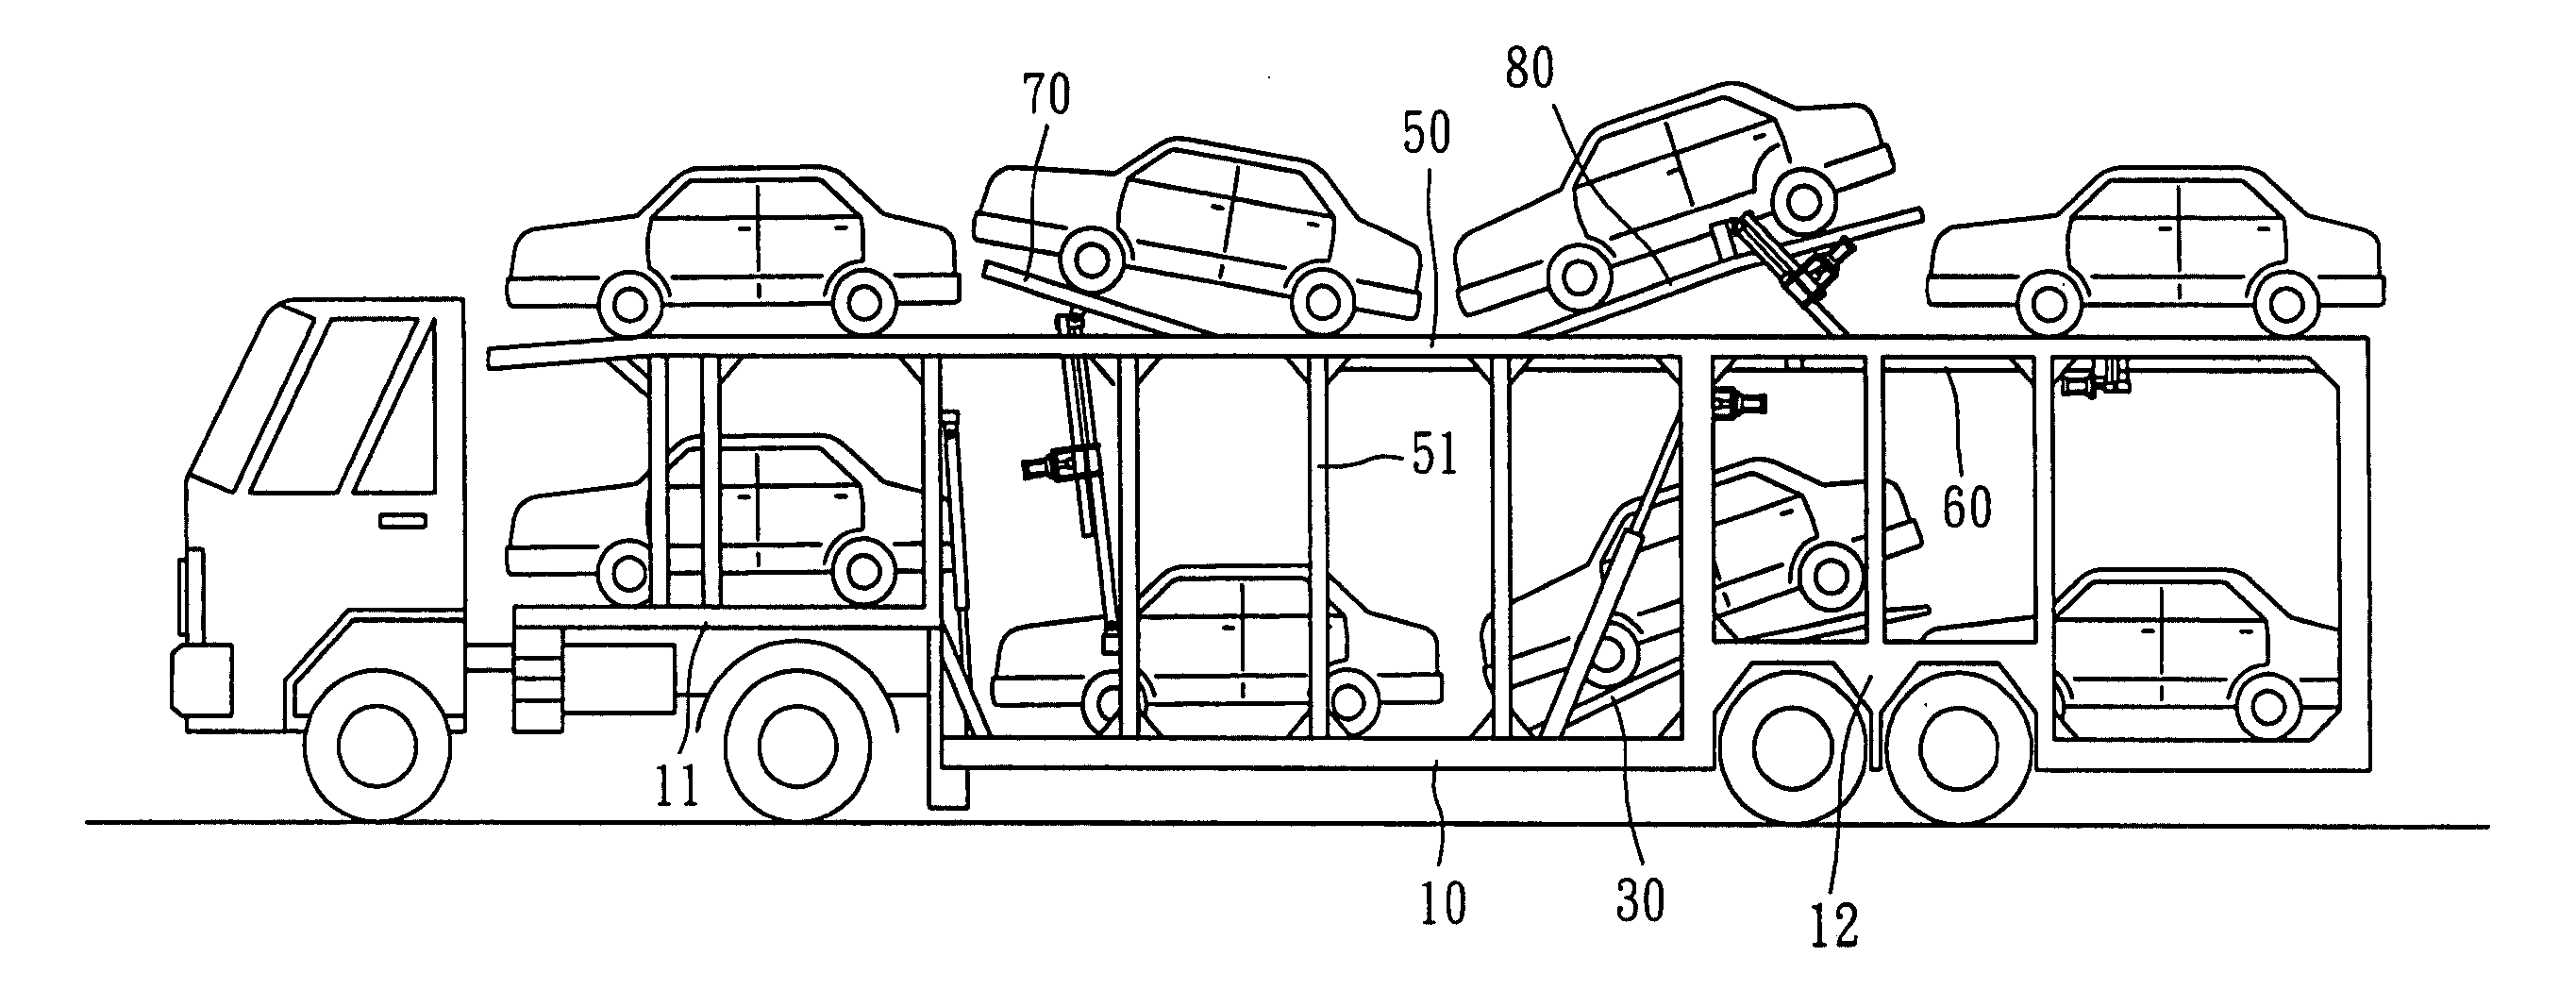 Frame structure for auto transport trailer